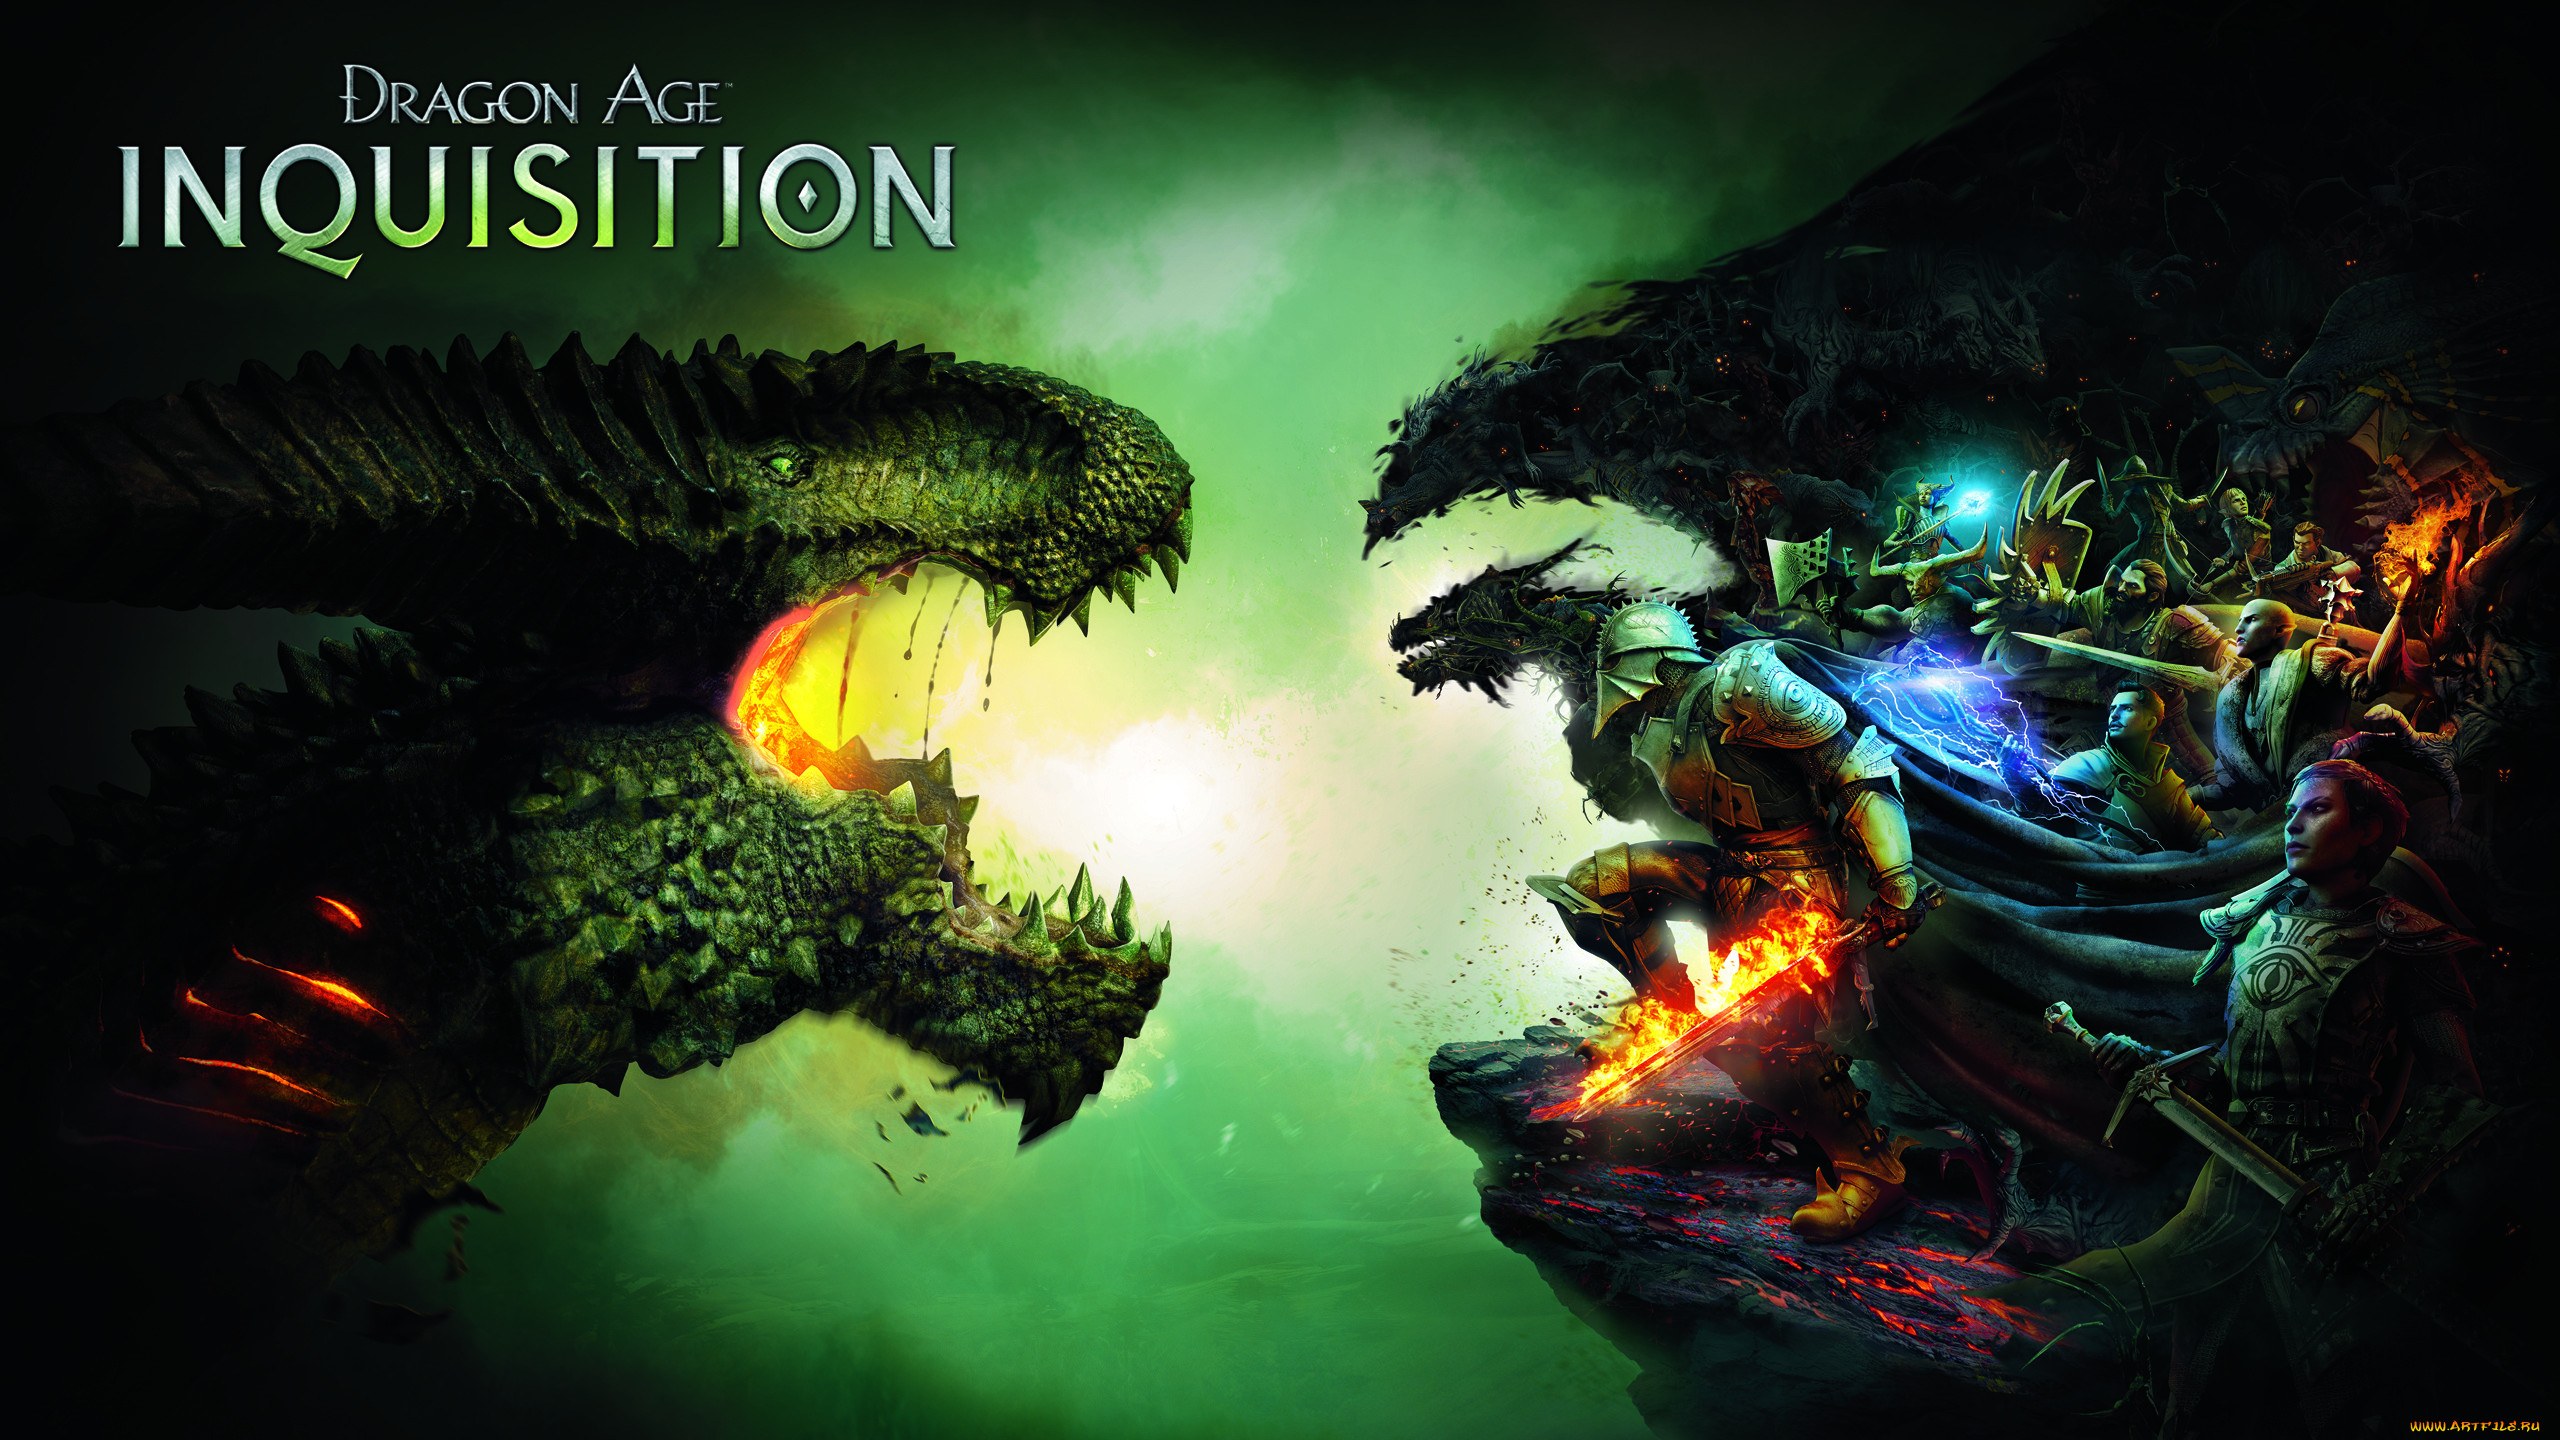  , dragon age iii,  inquisition, inquisition, dragon, age, iii